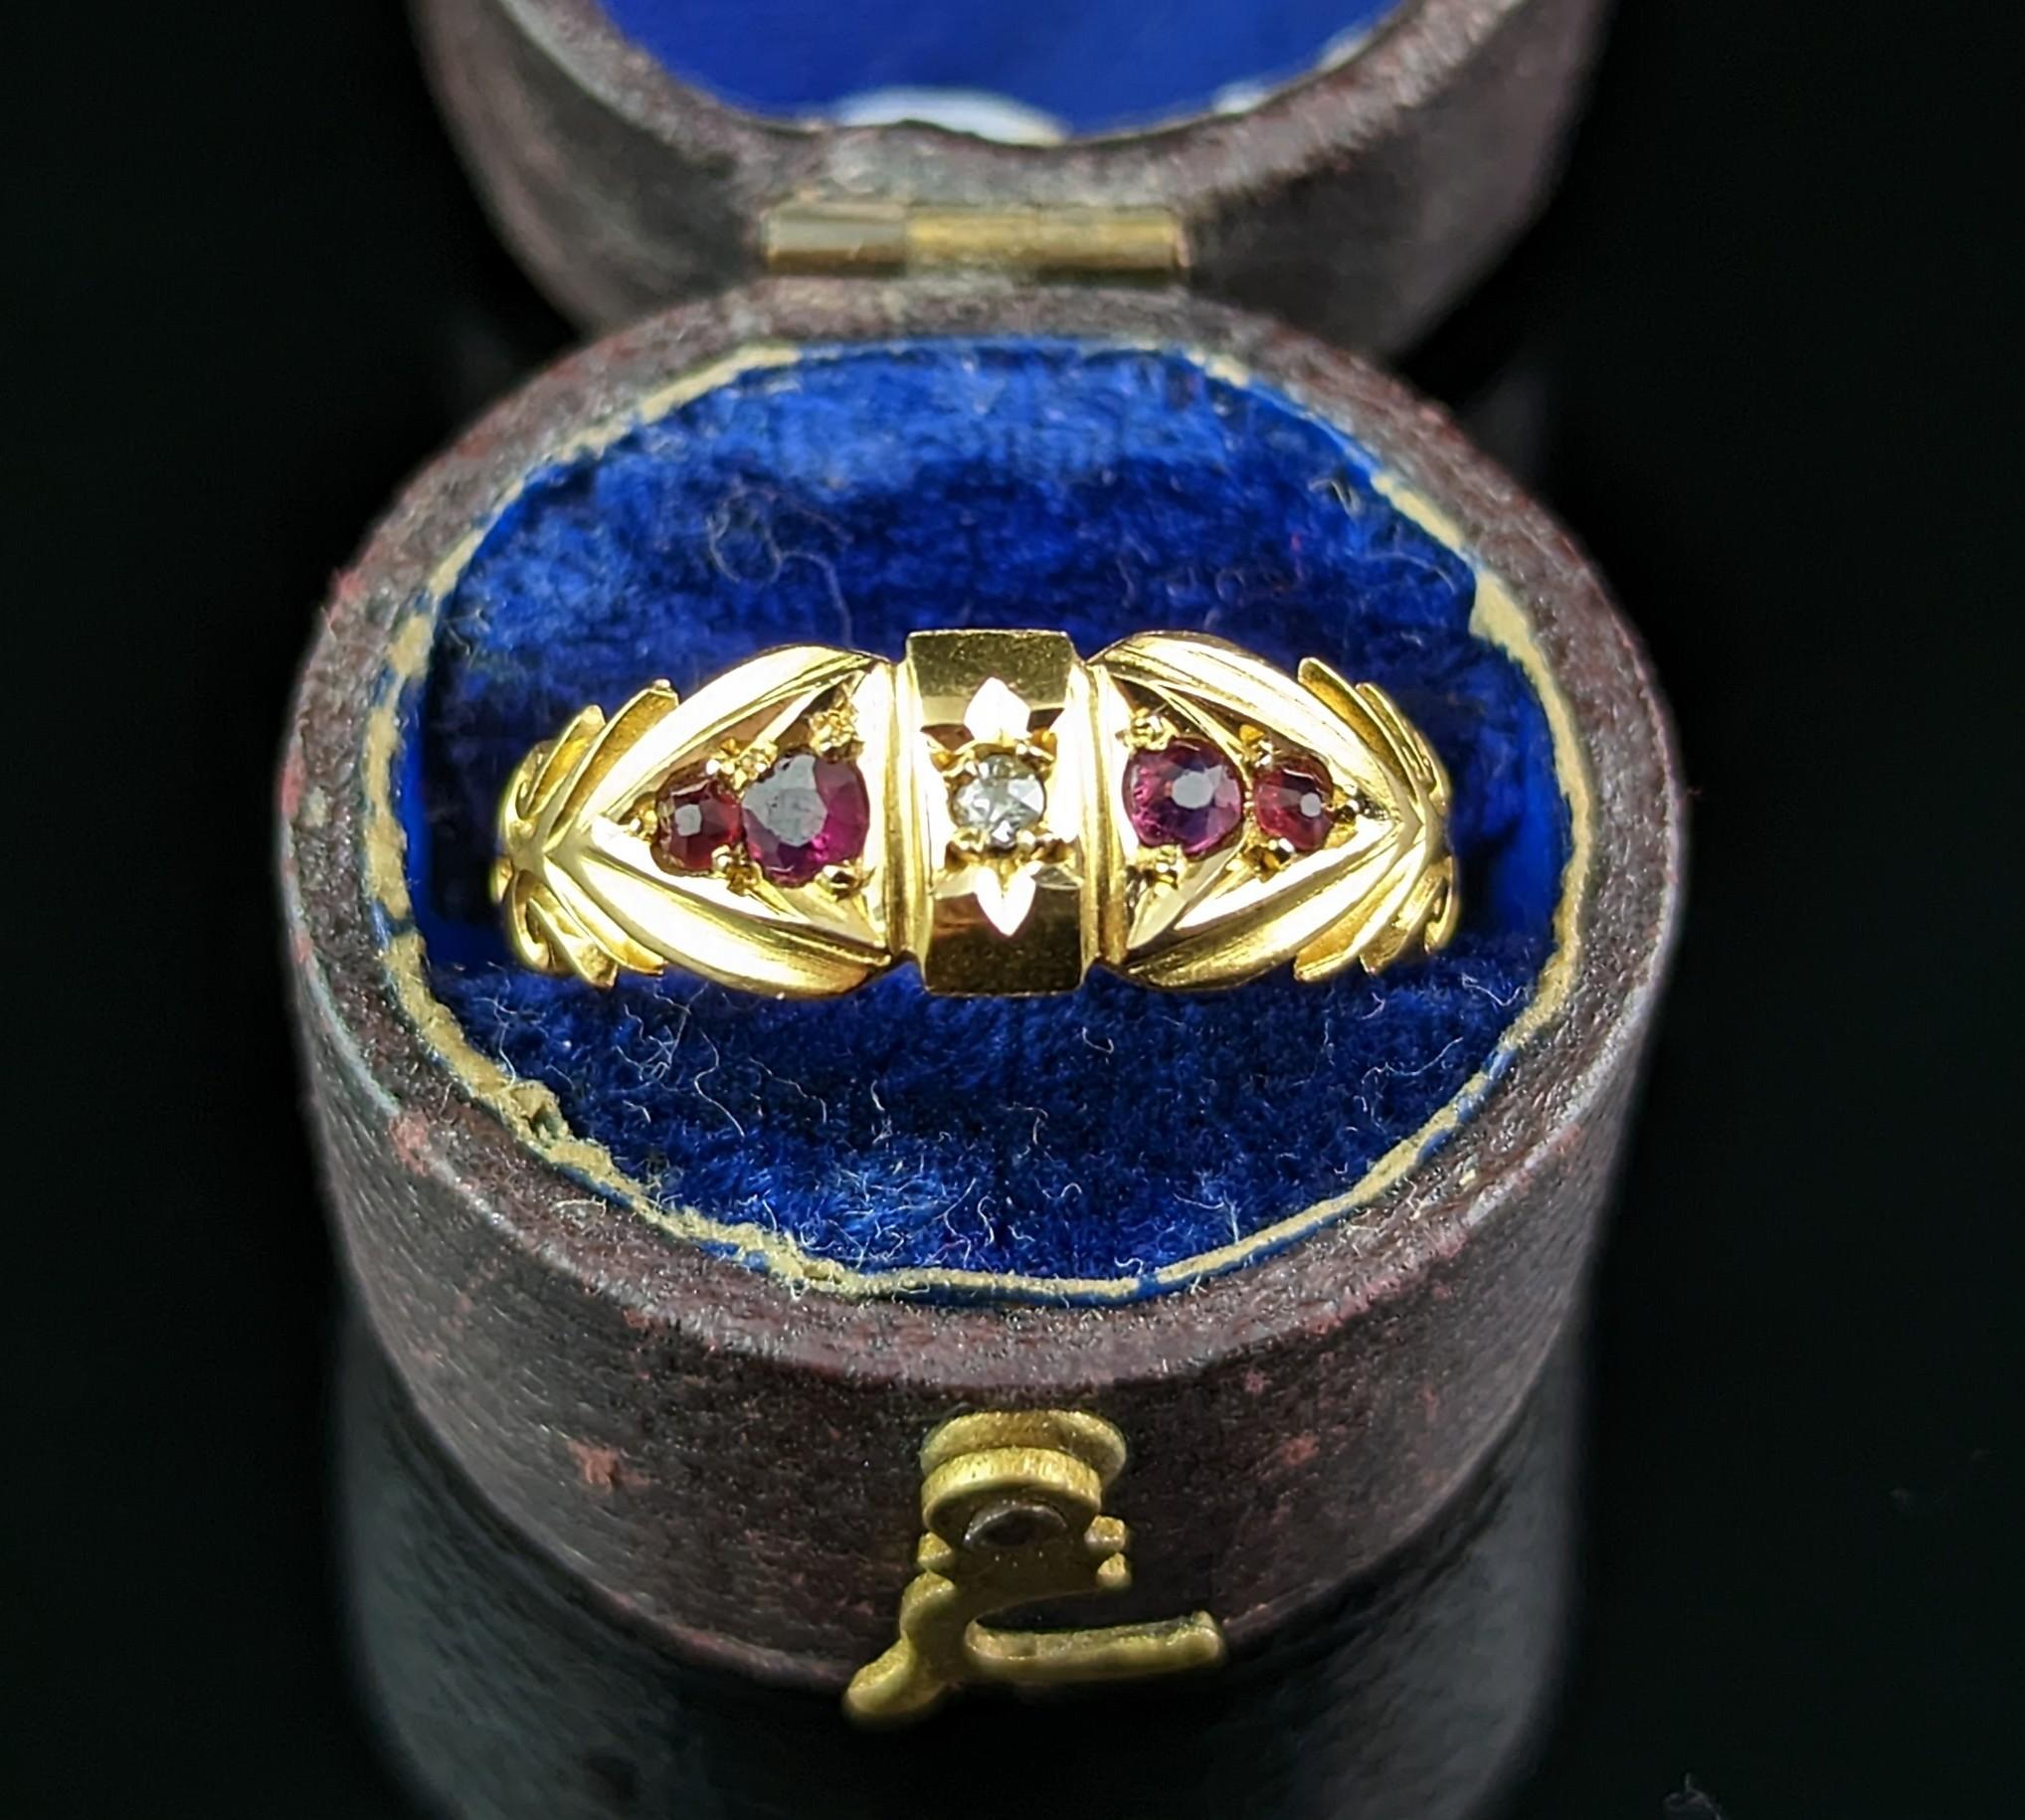 A classic and timeless antique 18kt yellow gold, Ruby and Diamond ring.

It has a very decorative face with deeply engraved shoulders and a front central rectangular shaped panel set with a single diamond chip.

Either side of this central diamond